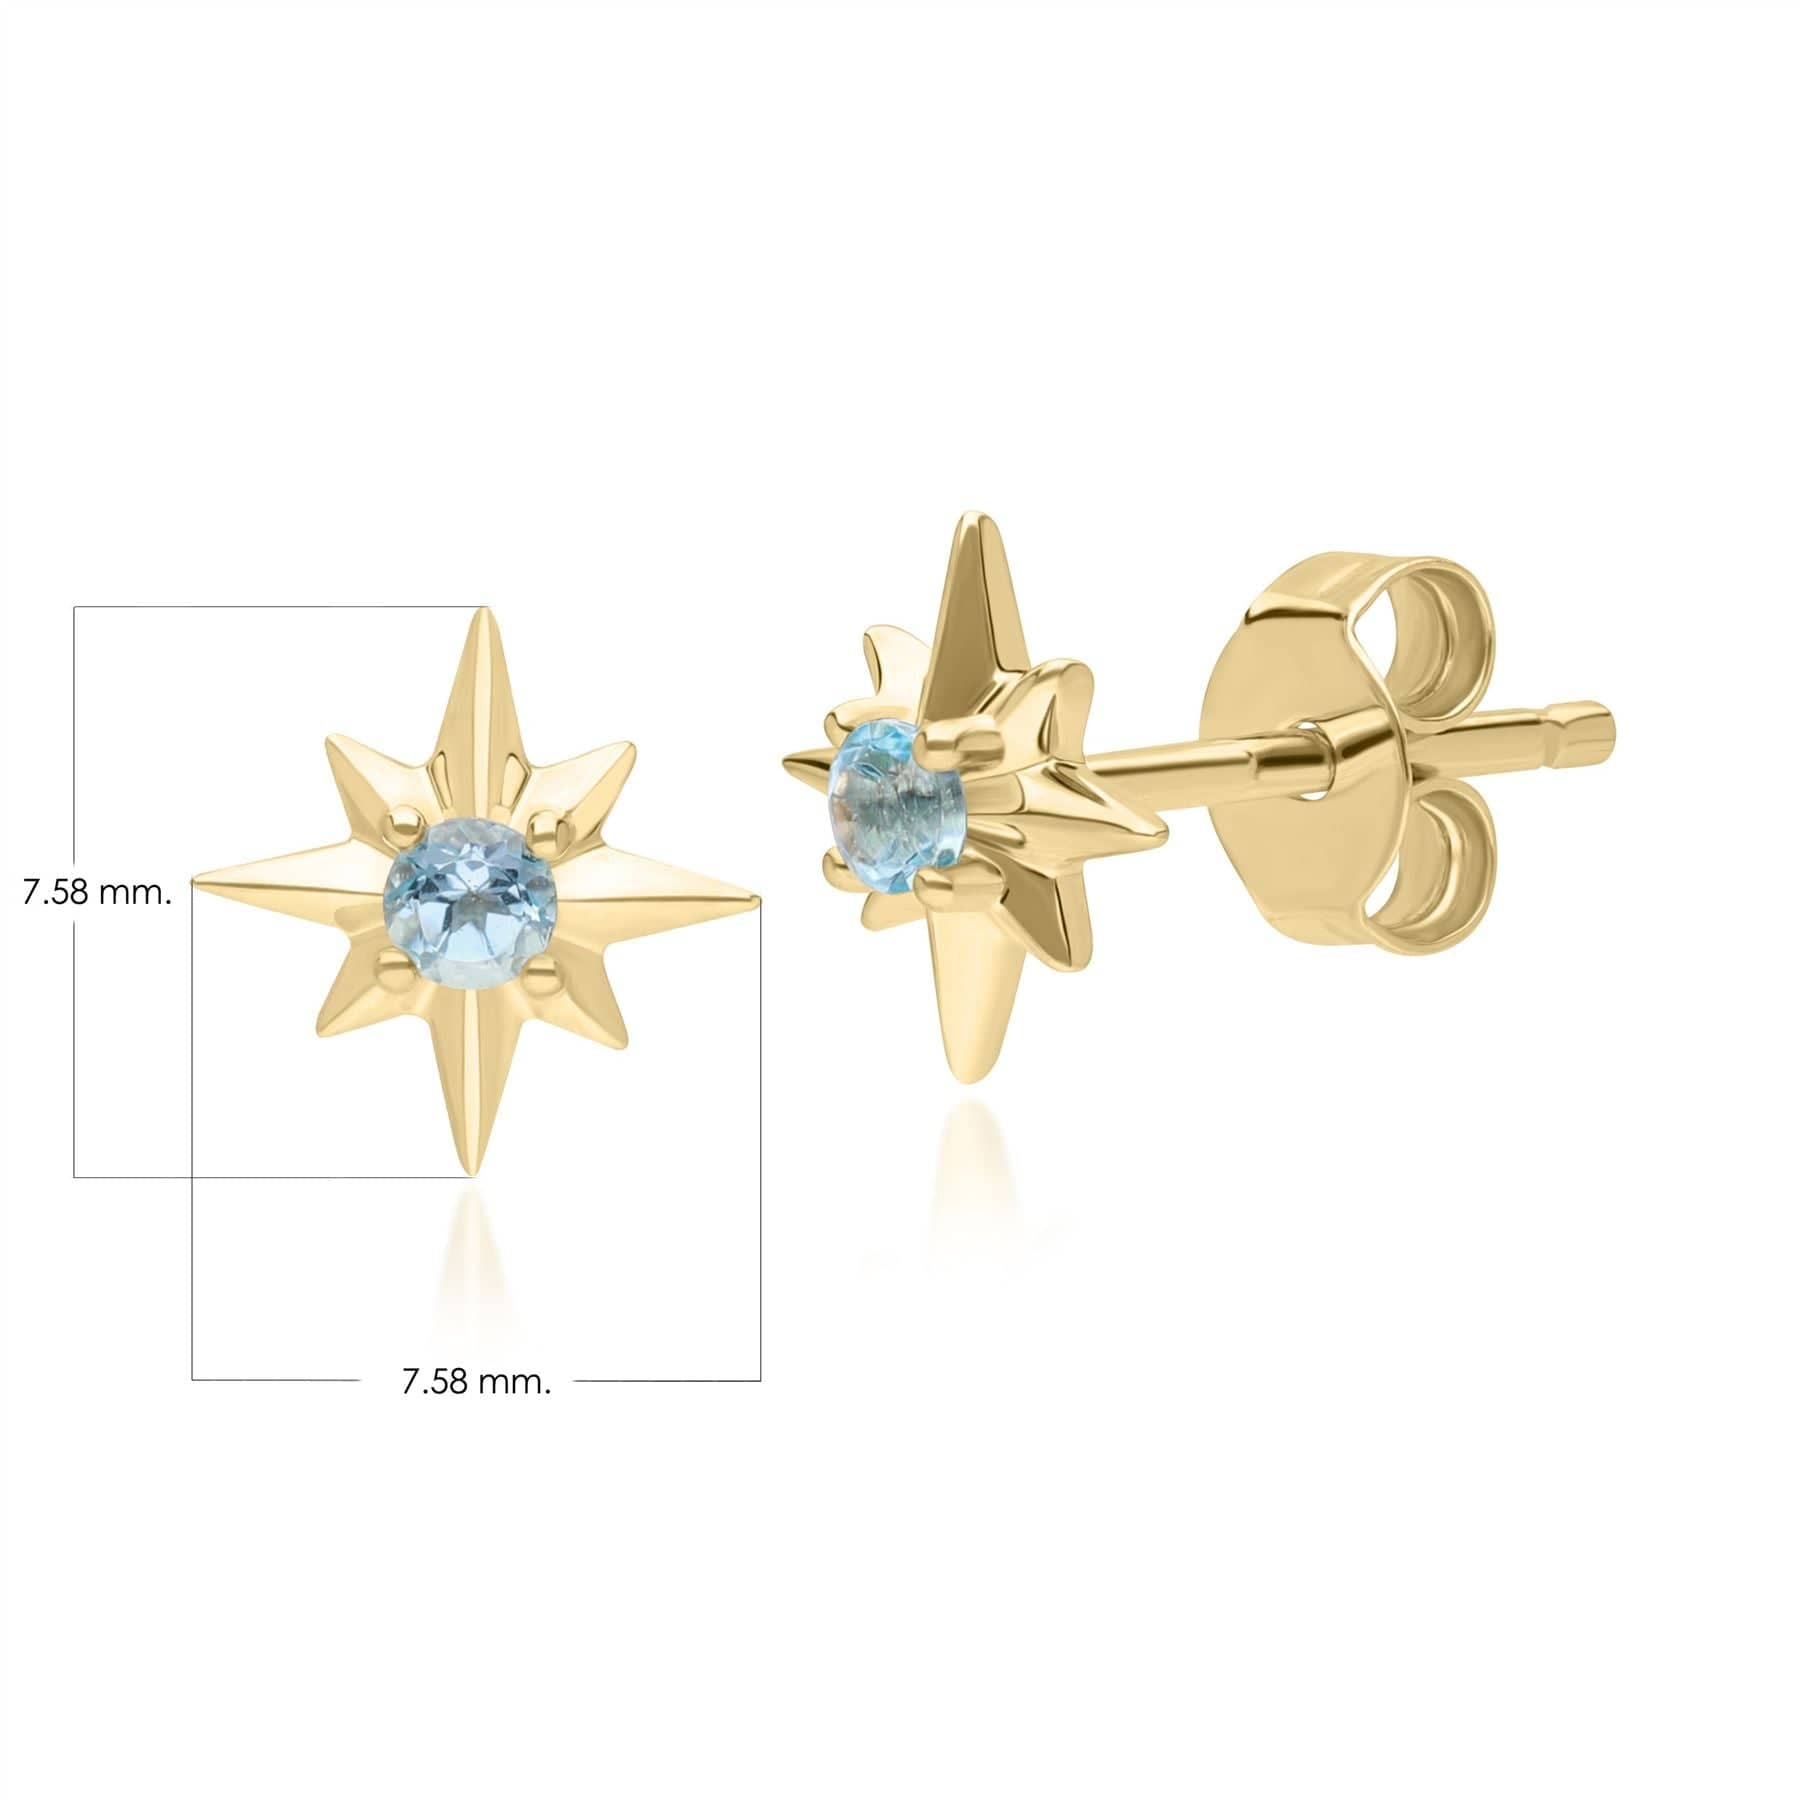 135E1821019 Night Sky Light Swiss Blue Topaz Cabochon Star Stud Earrings in 9ct Yellow Gold Dimensions